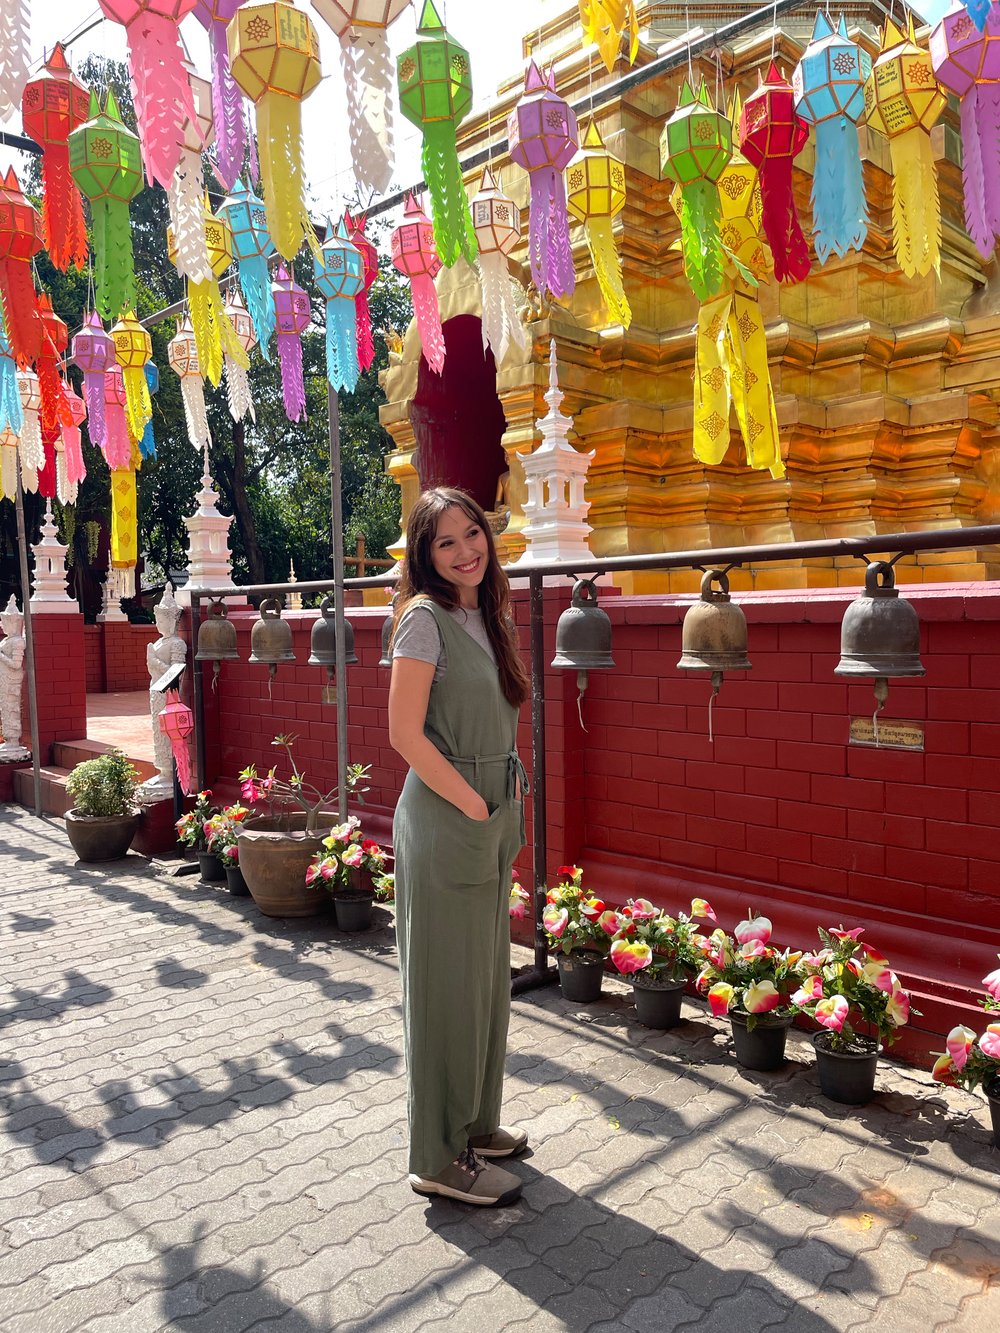 Exploring Chiang Mai during the Loy Krathong festival of lights